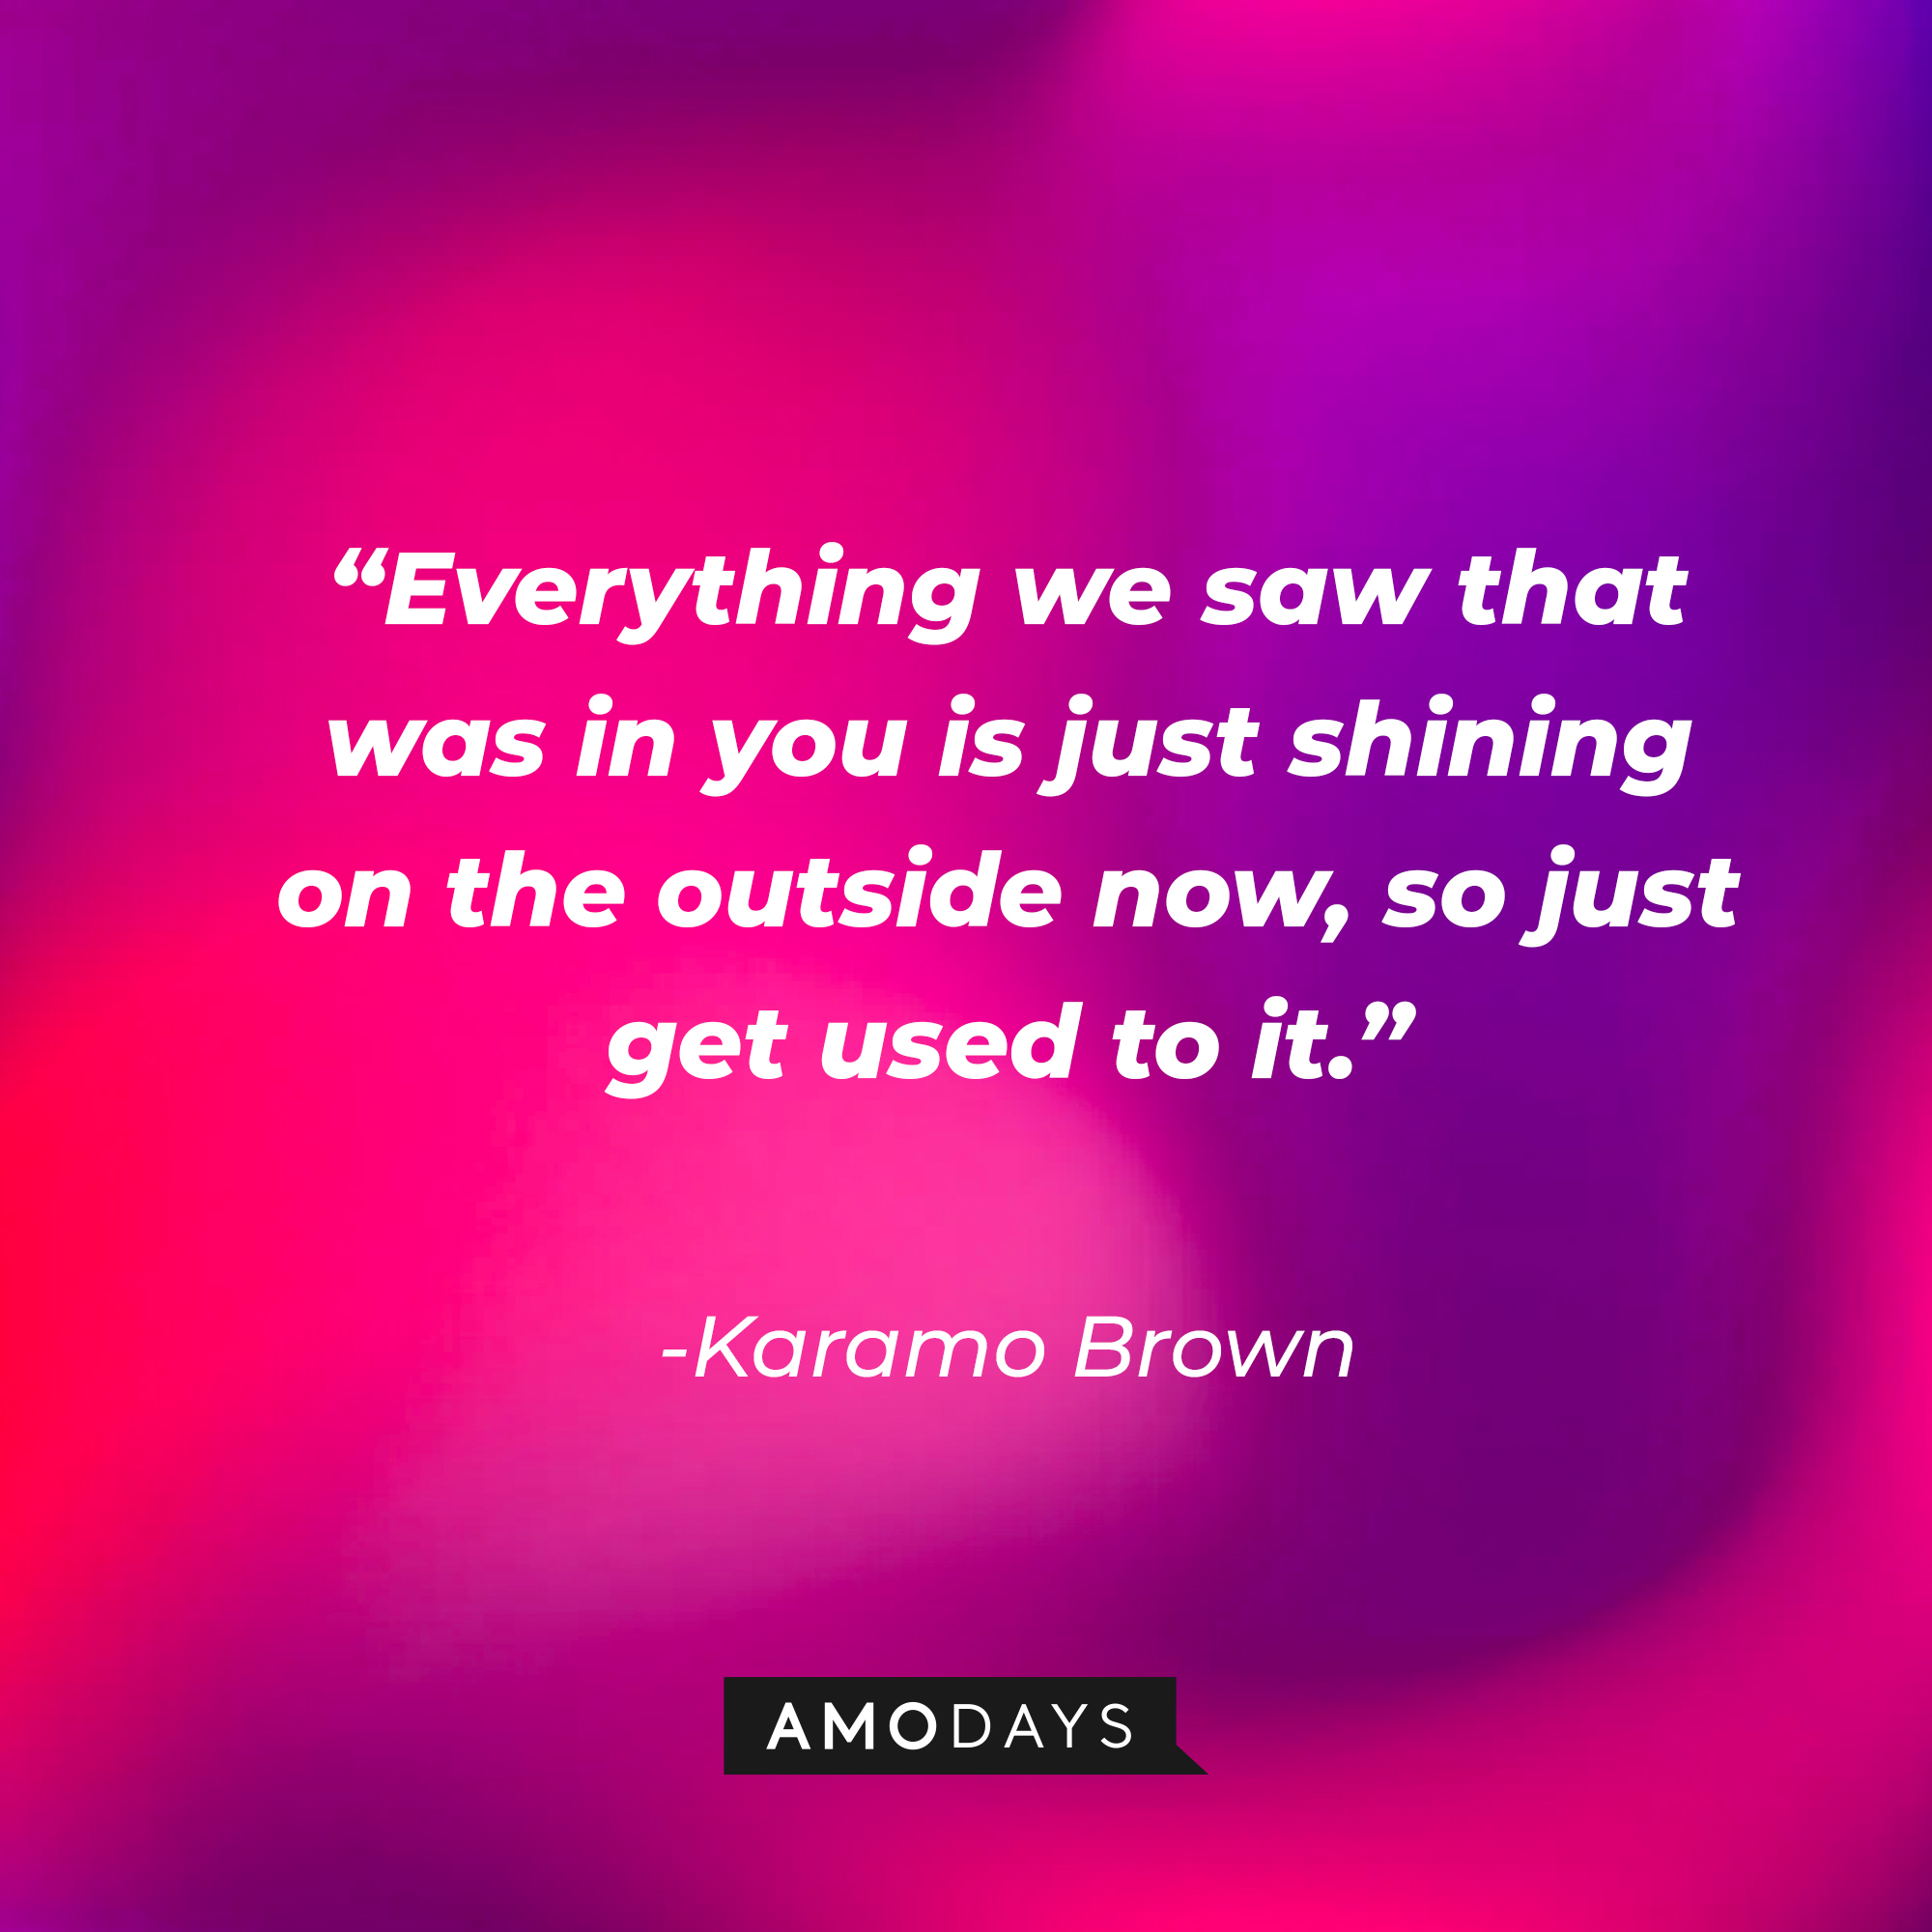 Karamo Brown's quote: "Everything we saw that was in you is just shining on the outside now, so just get used to it." | Source: Getty Images